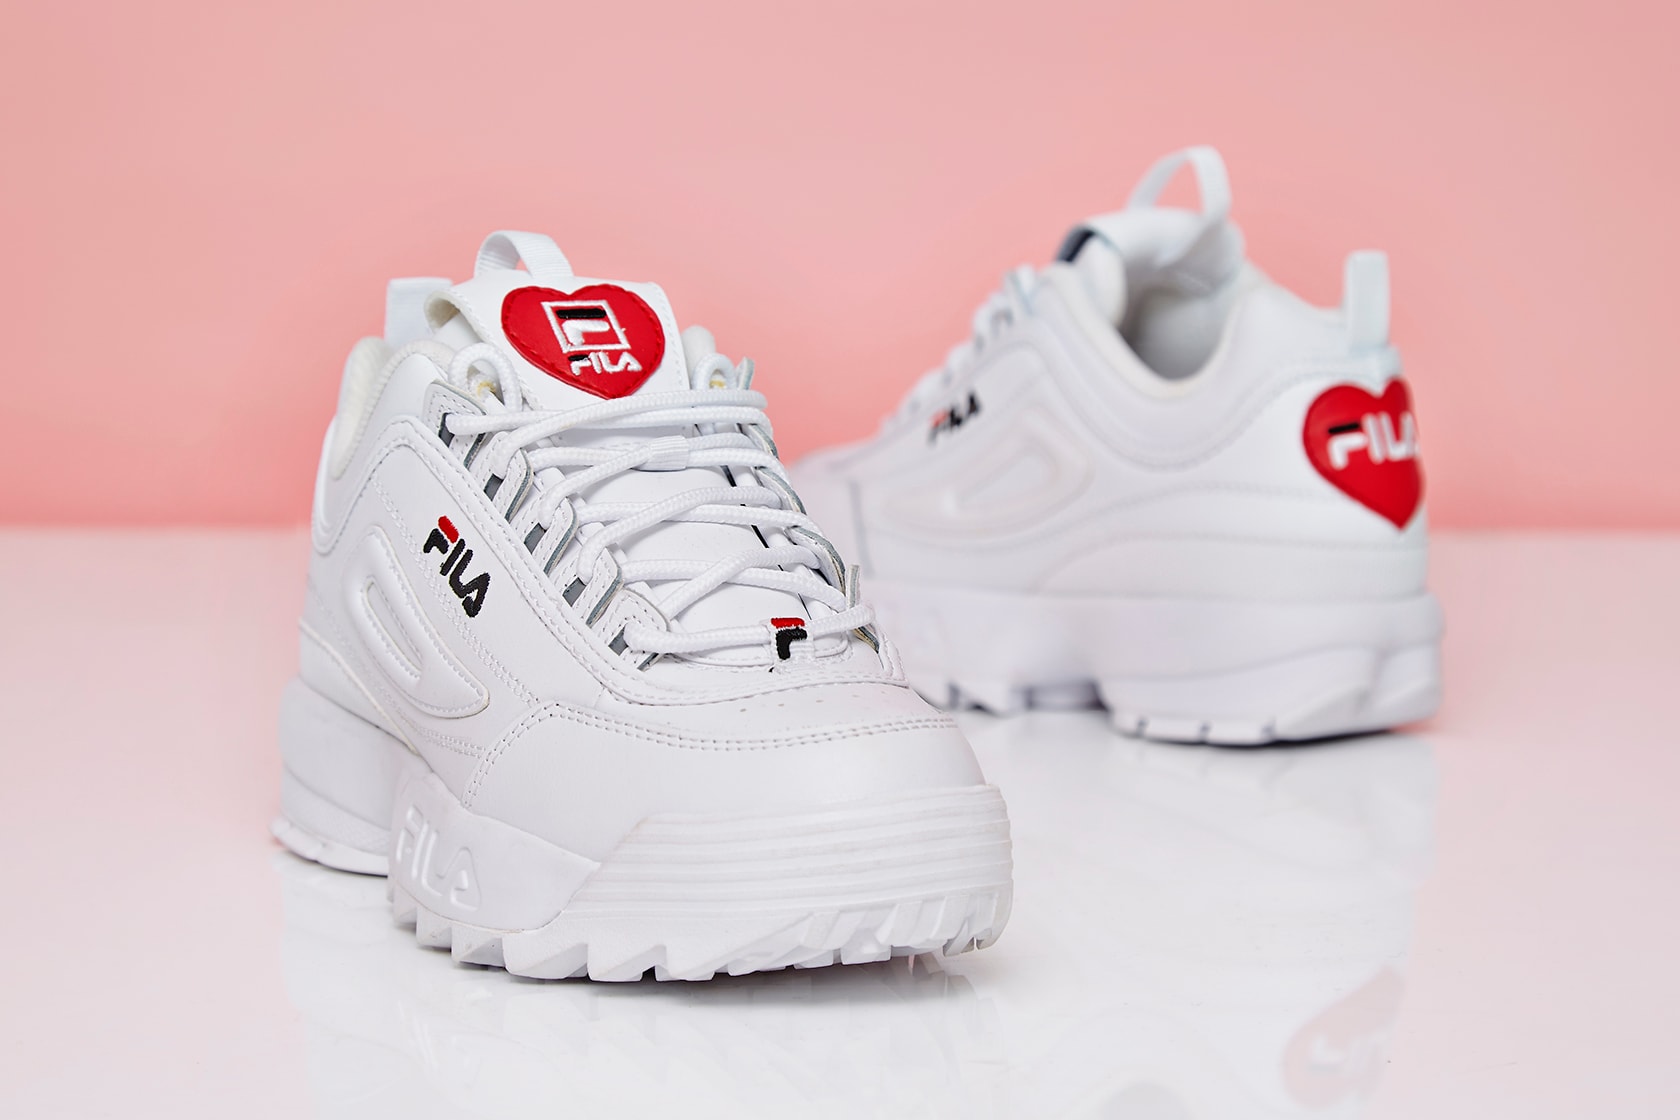 FILA Disruptor Heart Valentine's Day Sneakers Trainers OFFICE